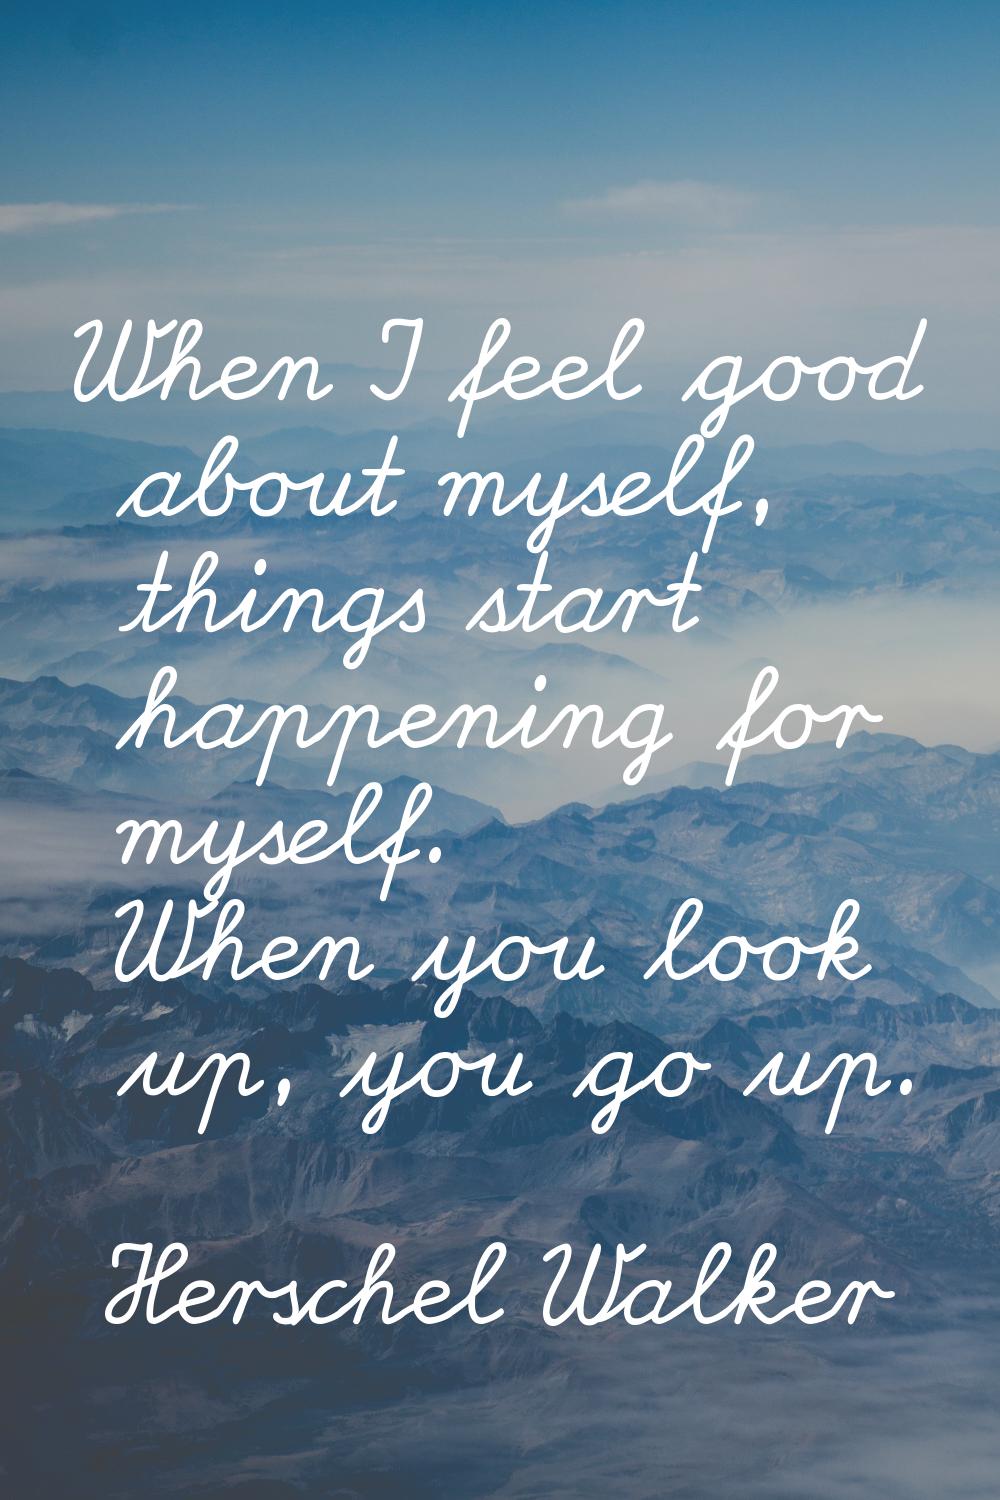 When I feel good about myself, things start happening for myself. When you look up, you go up.